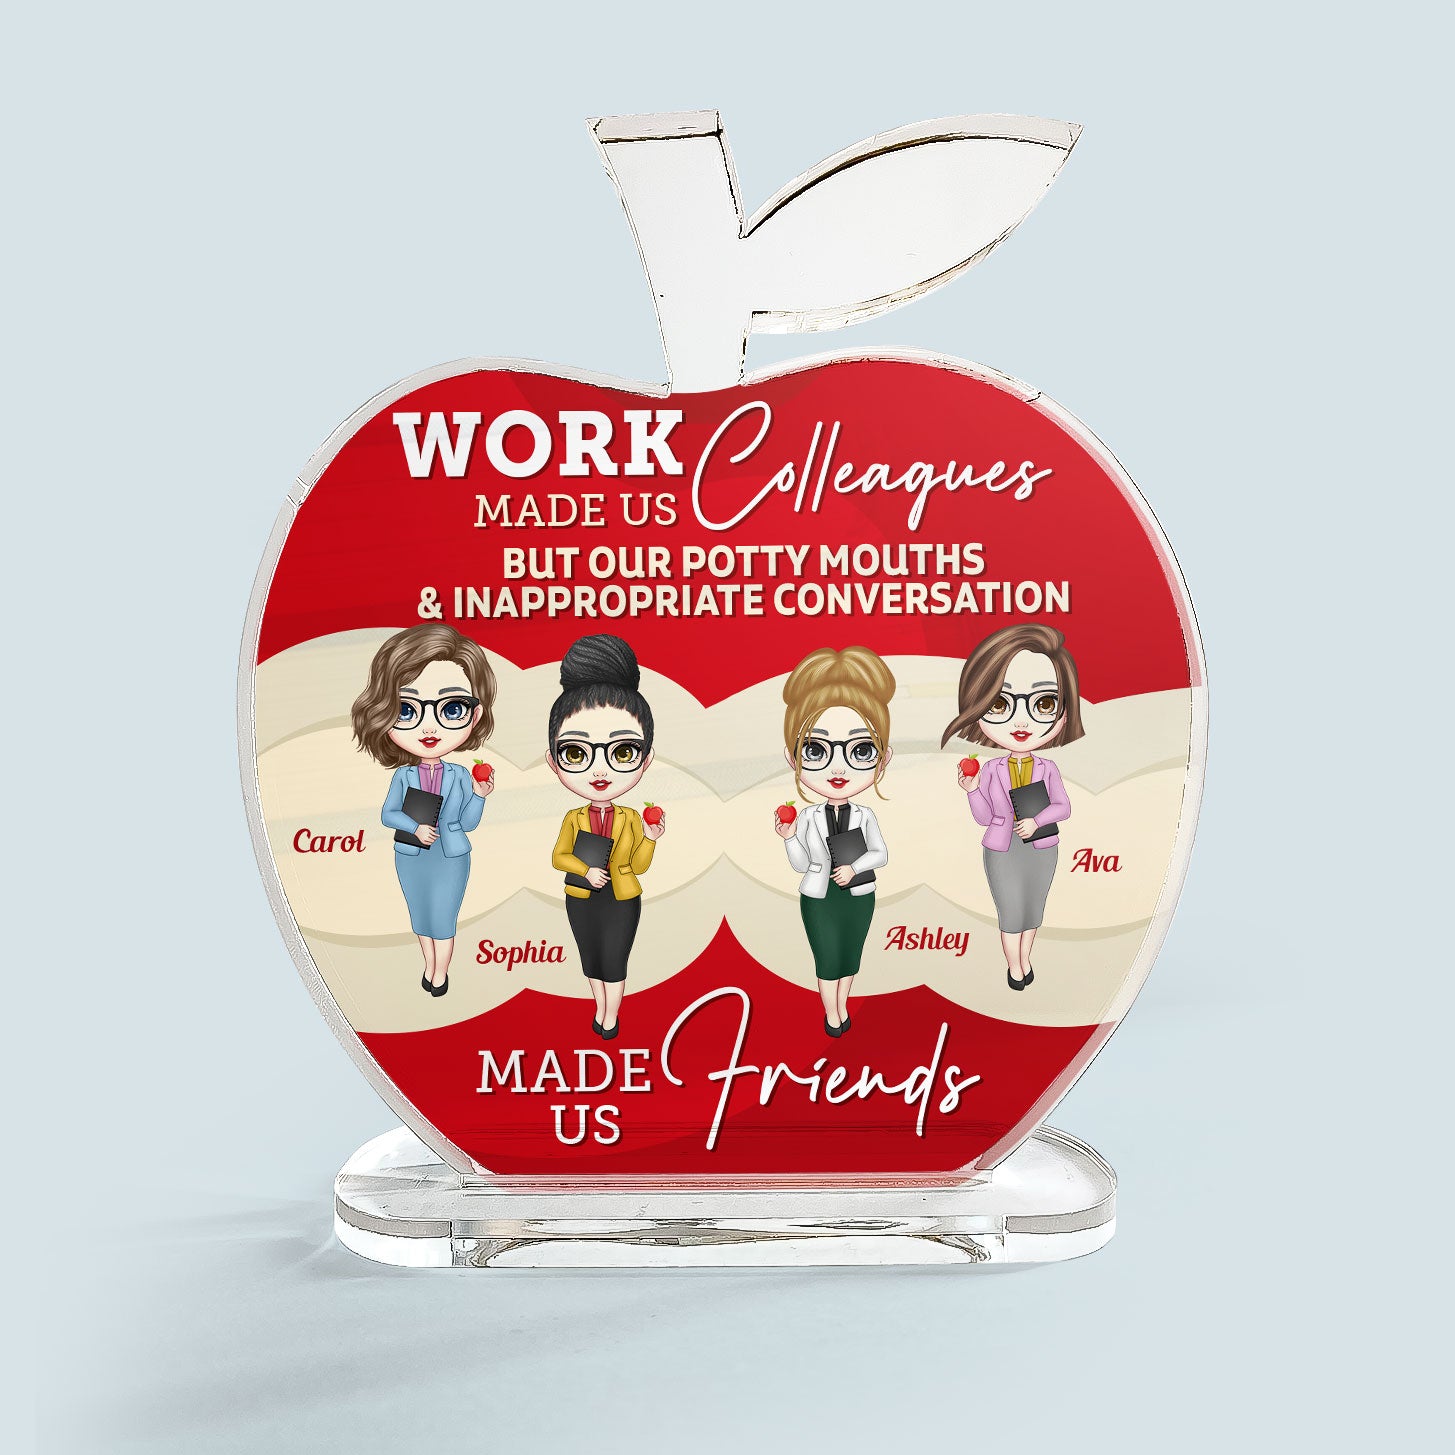 Work Made Us Colleagues - Personalized Apple Shaped Acrylic Plaque - Birthday, Funny, Desk Decor Gift For Teachers, Teacher Assistants, Coworkers, Colleagues